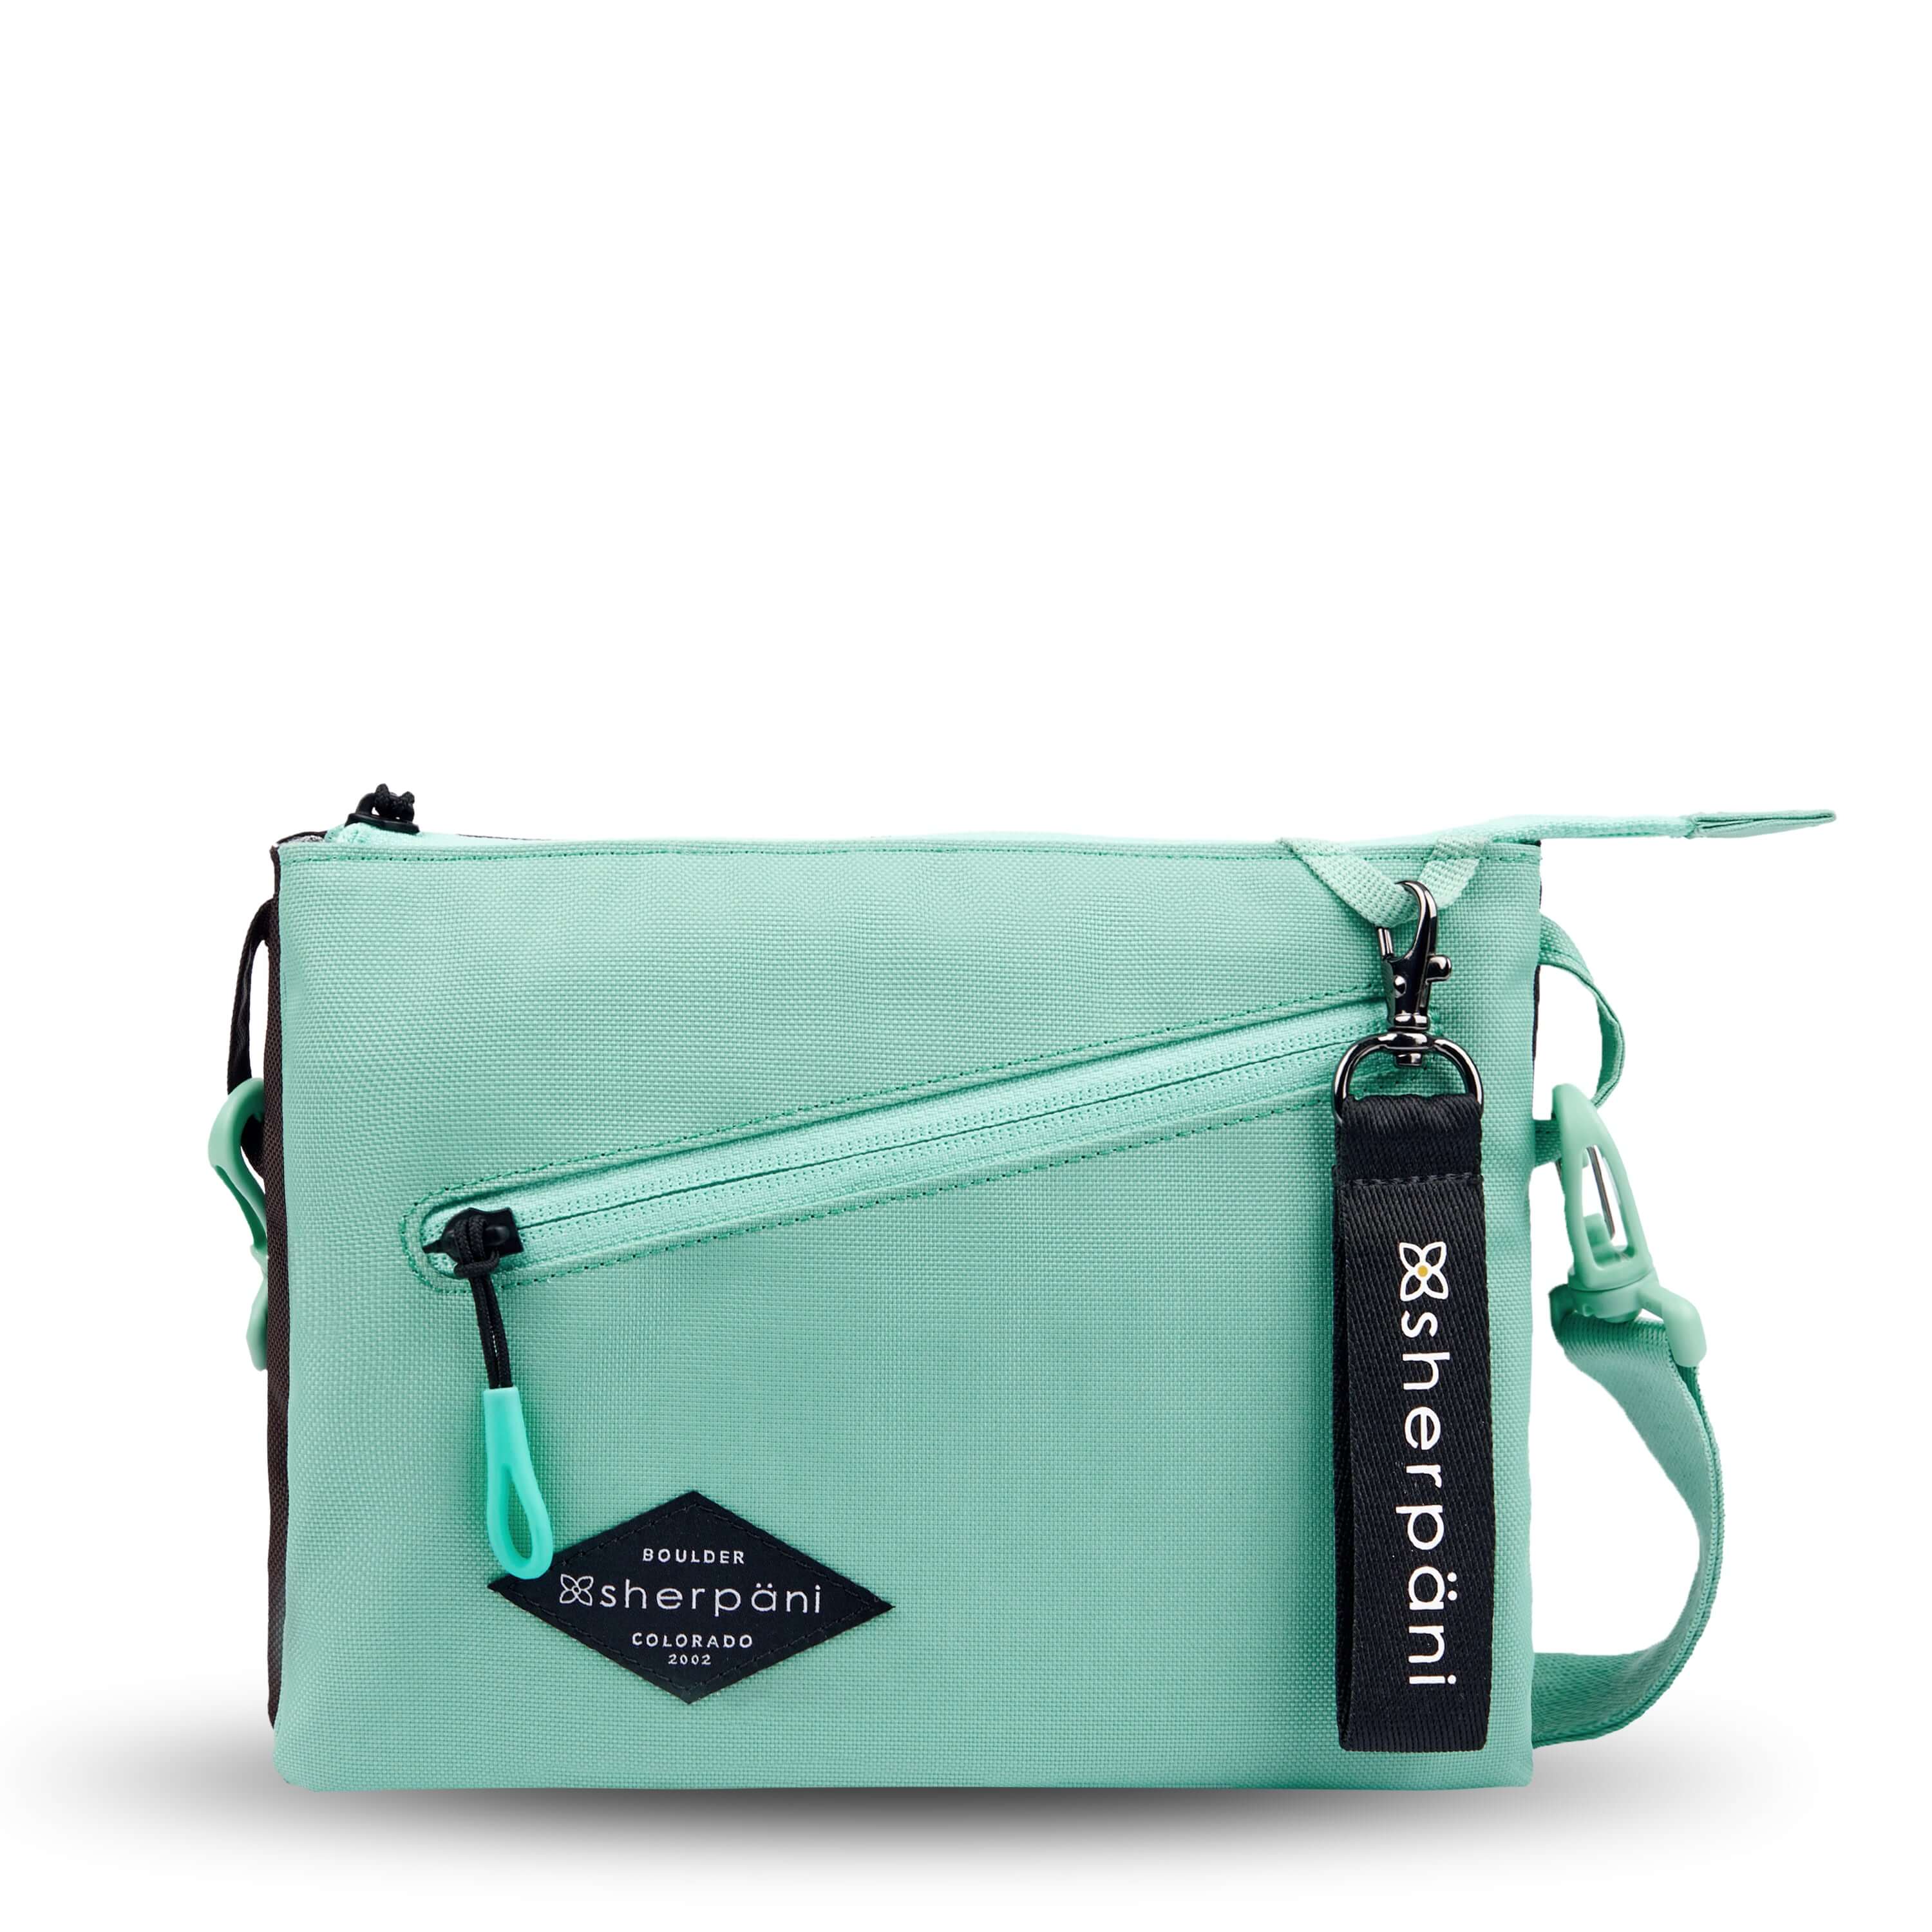 Green Leather Crossbody Handbag With Zipper. Soft Teal Leather 